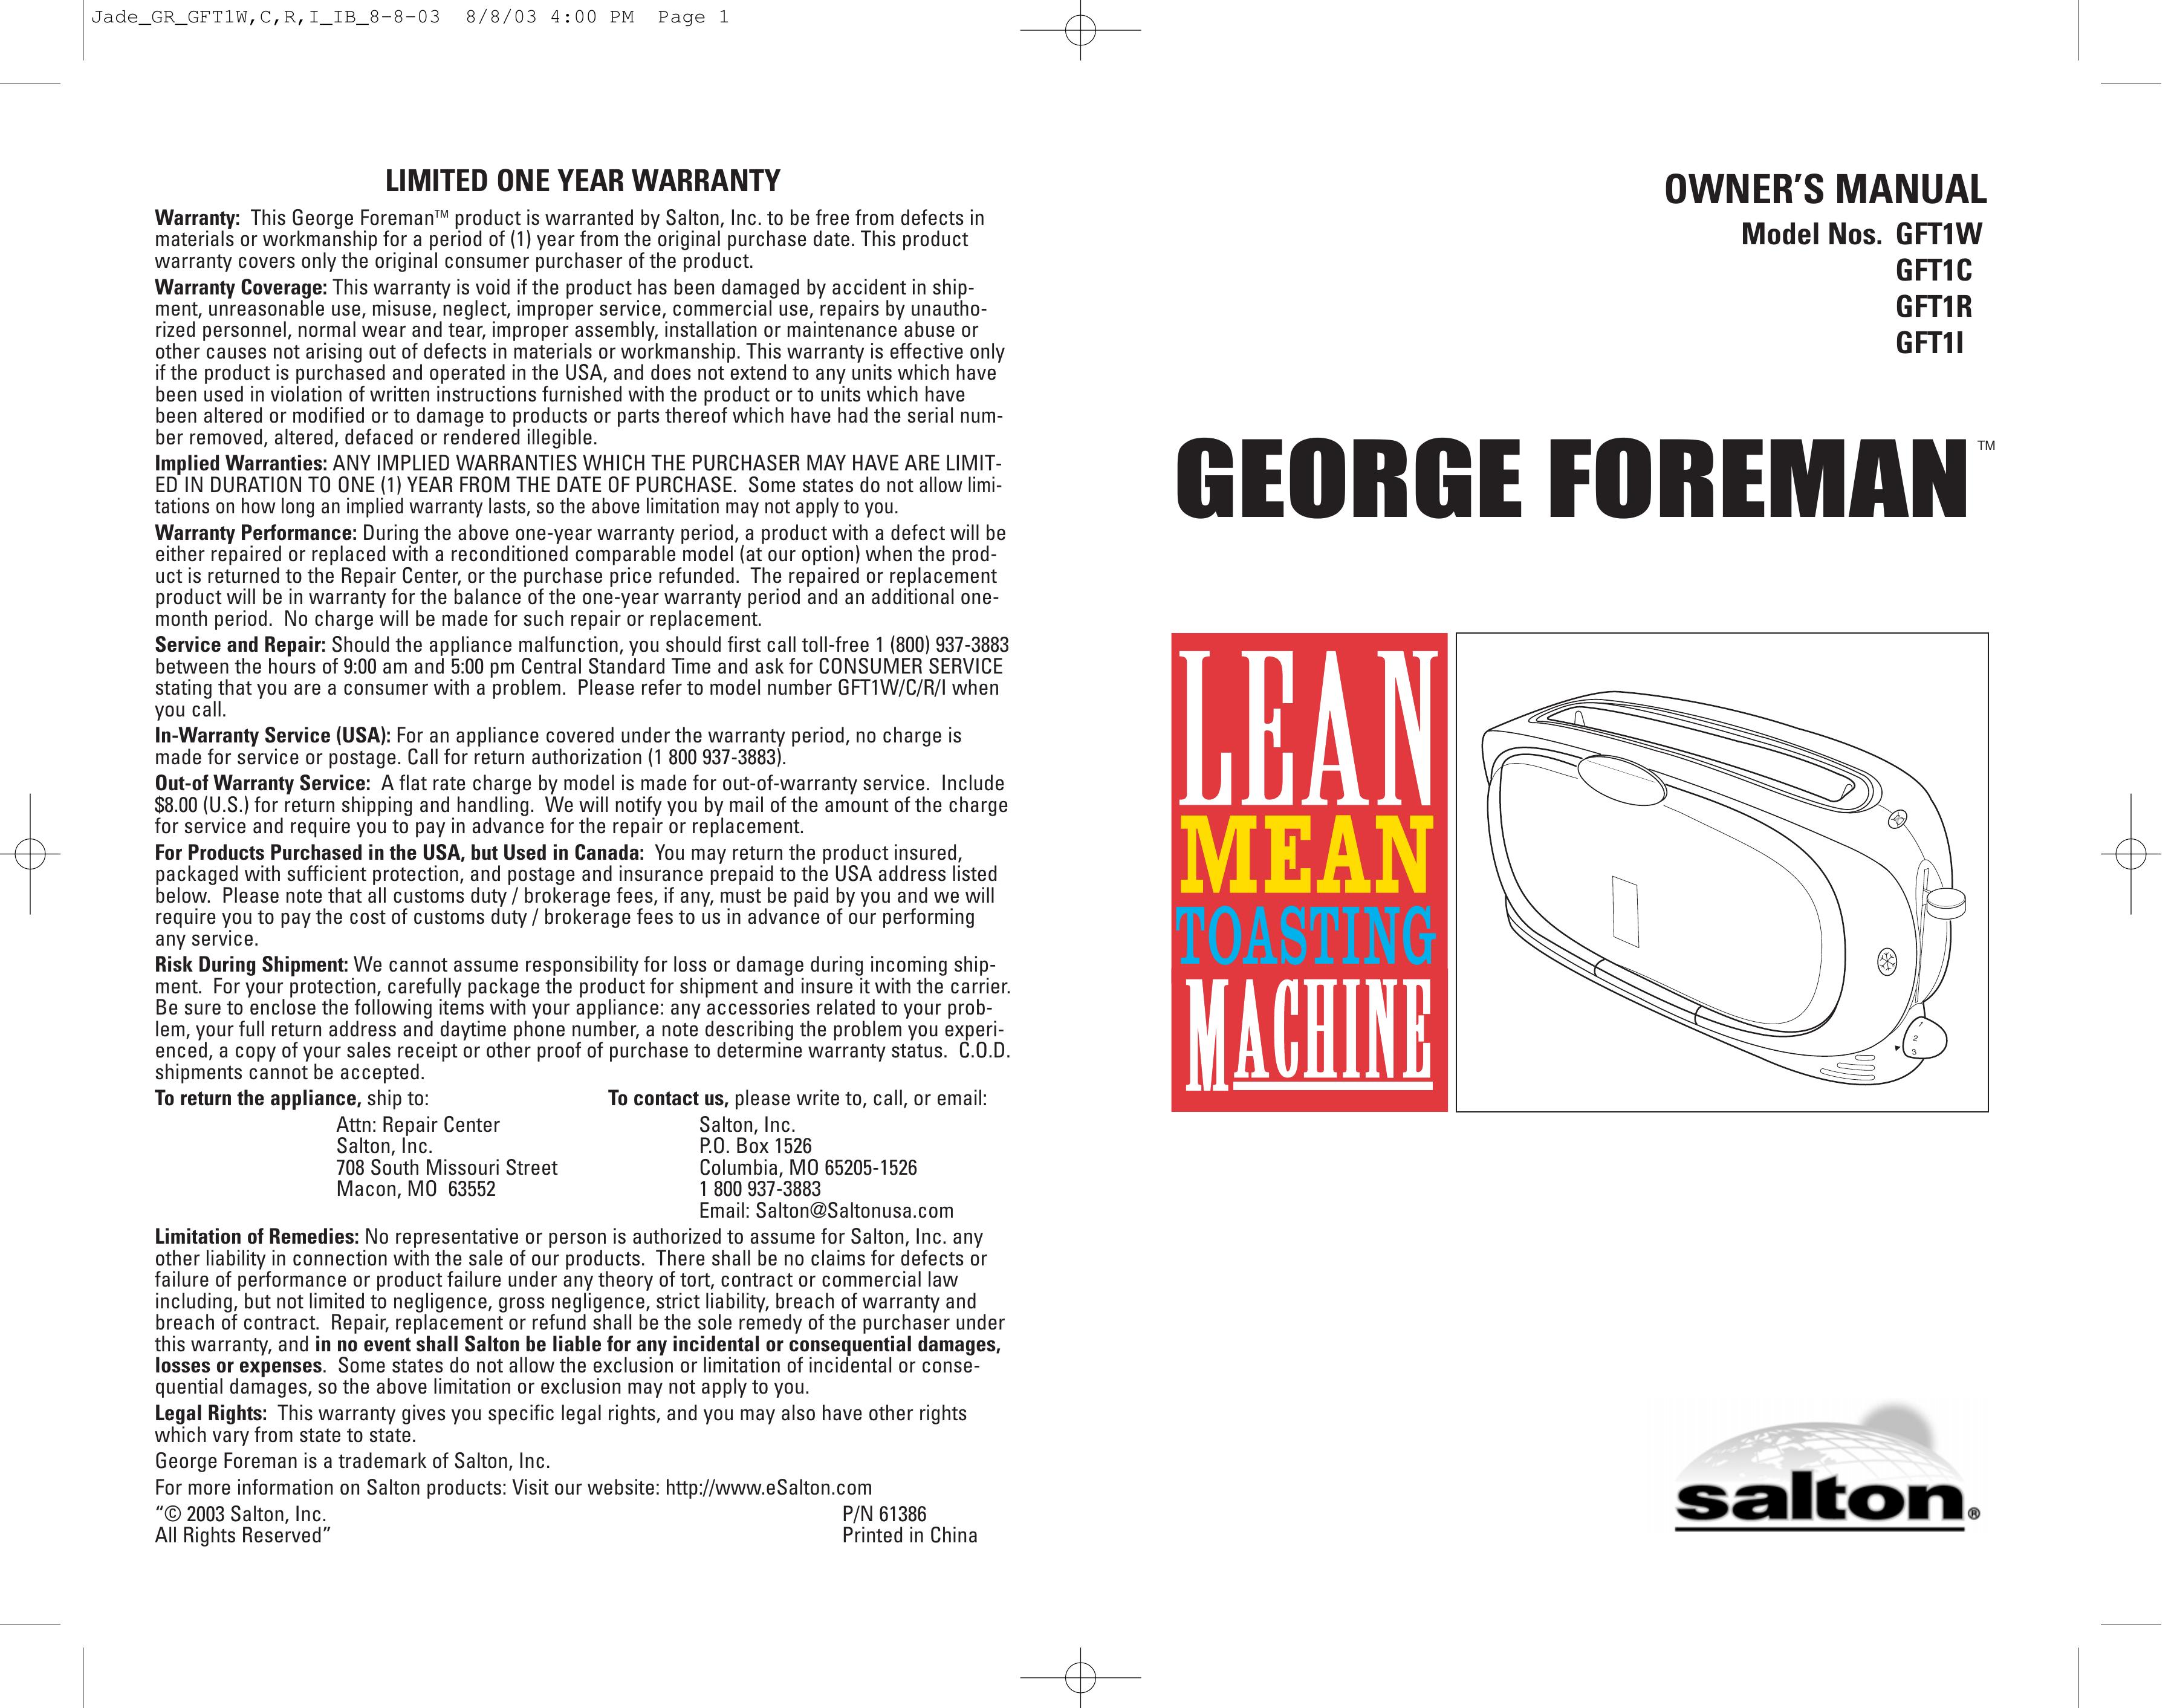 George Foreman GFT1C Toaster User Manual